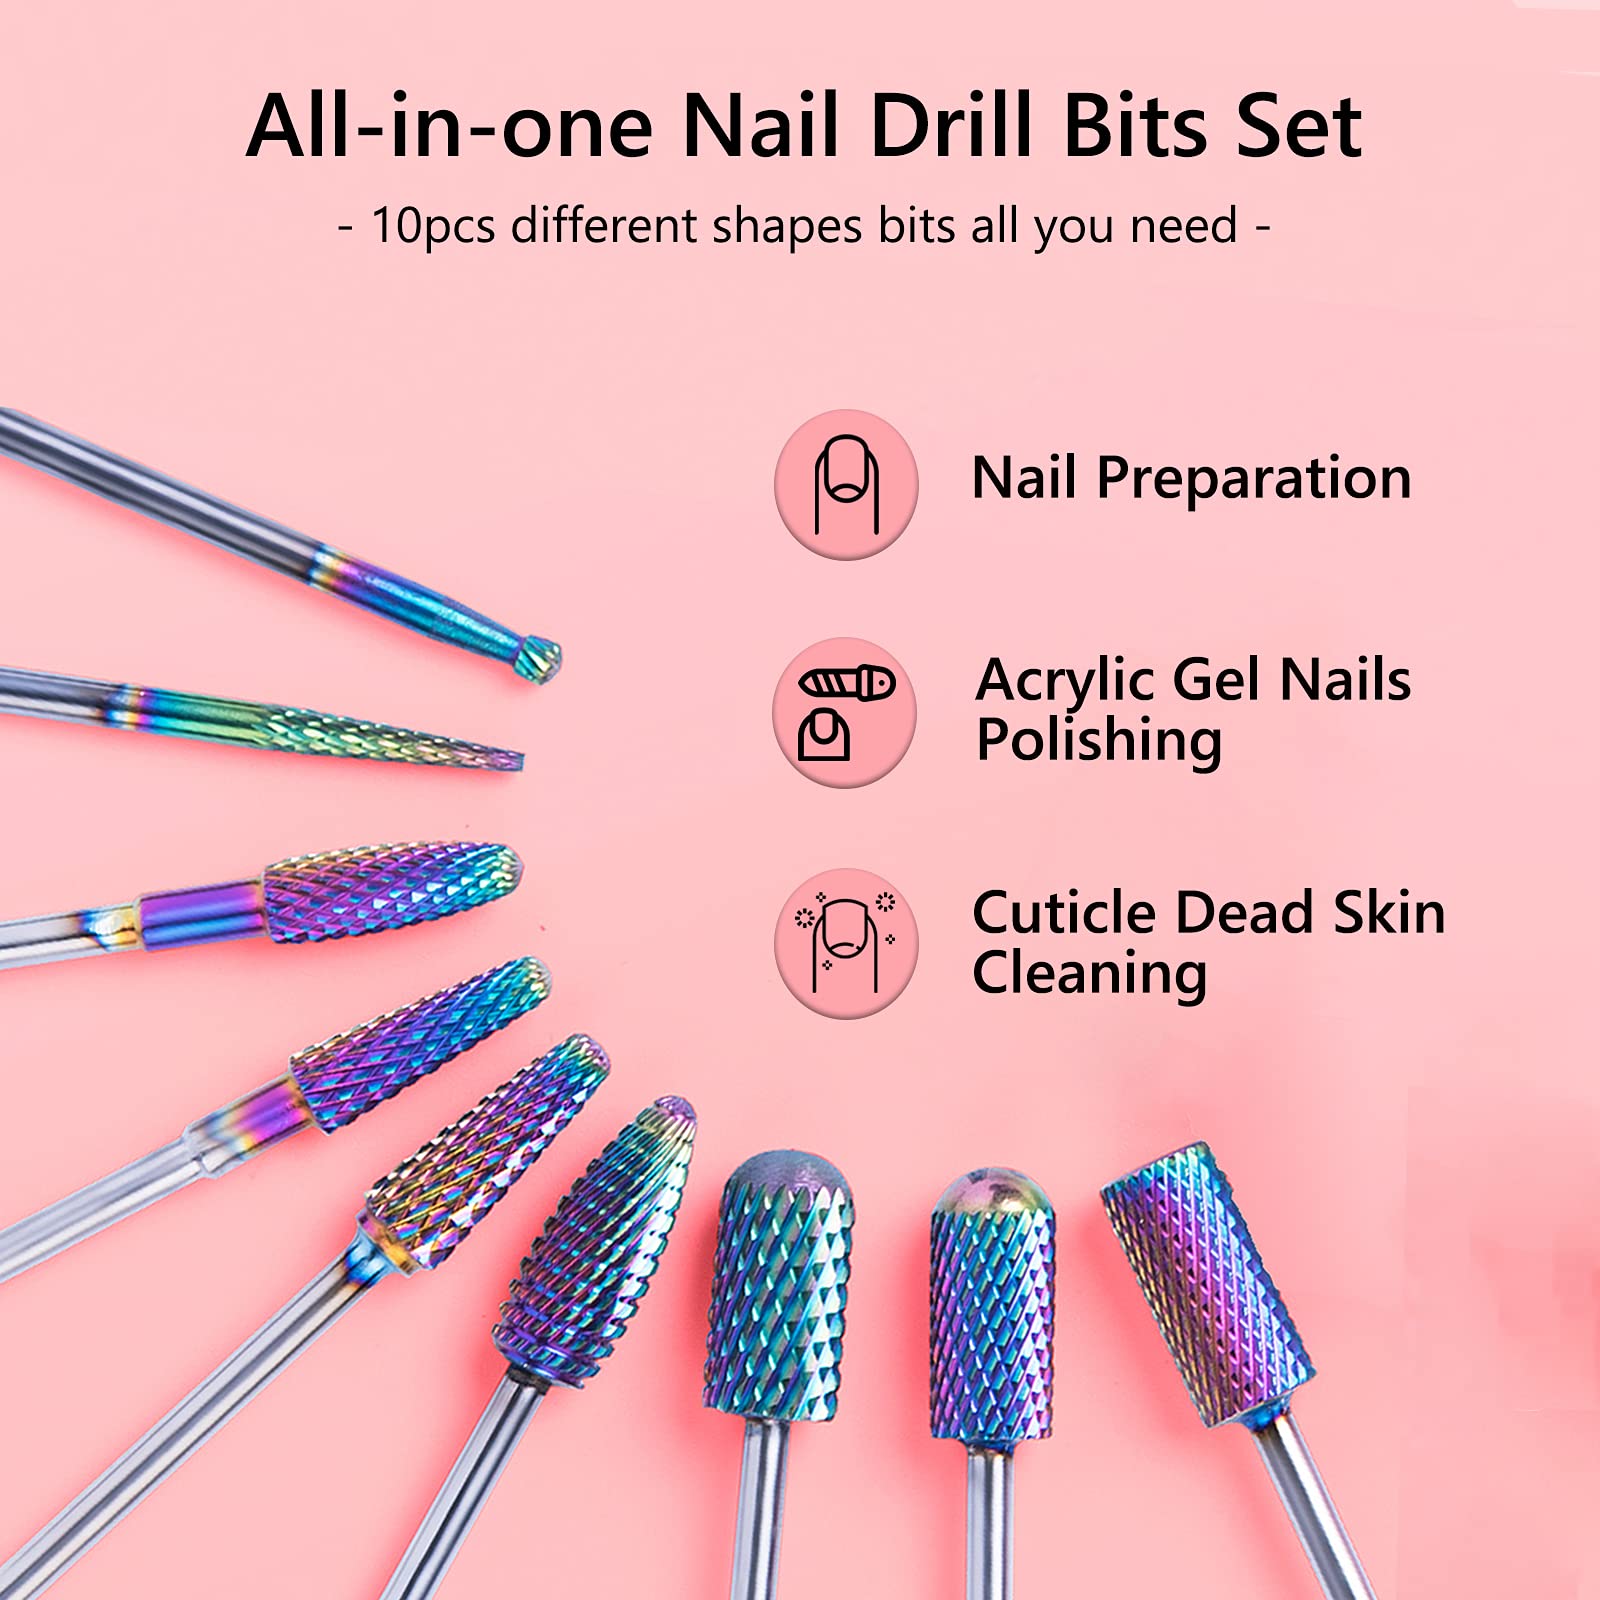 finibir 3/32 Drill Bits for Nails,Box Contains 14 Nail Drill Bits, Includes  Cuticle Drill Bit for Nails and Acrylic Nail Drill,DIY Manicure Yourself  Quickly and Painlessly, White, 6359863AL : Amazon.in: Beauty